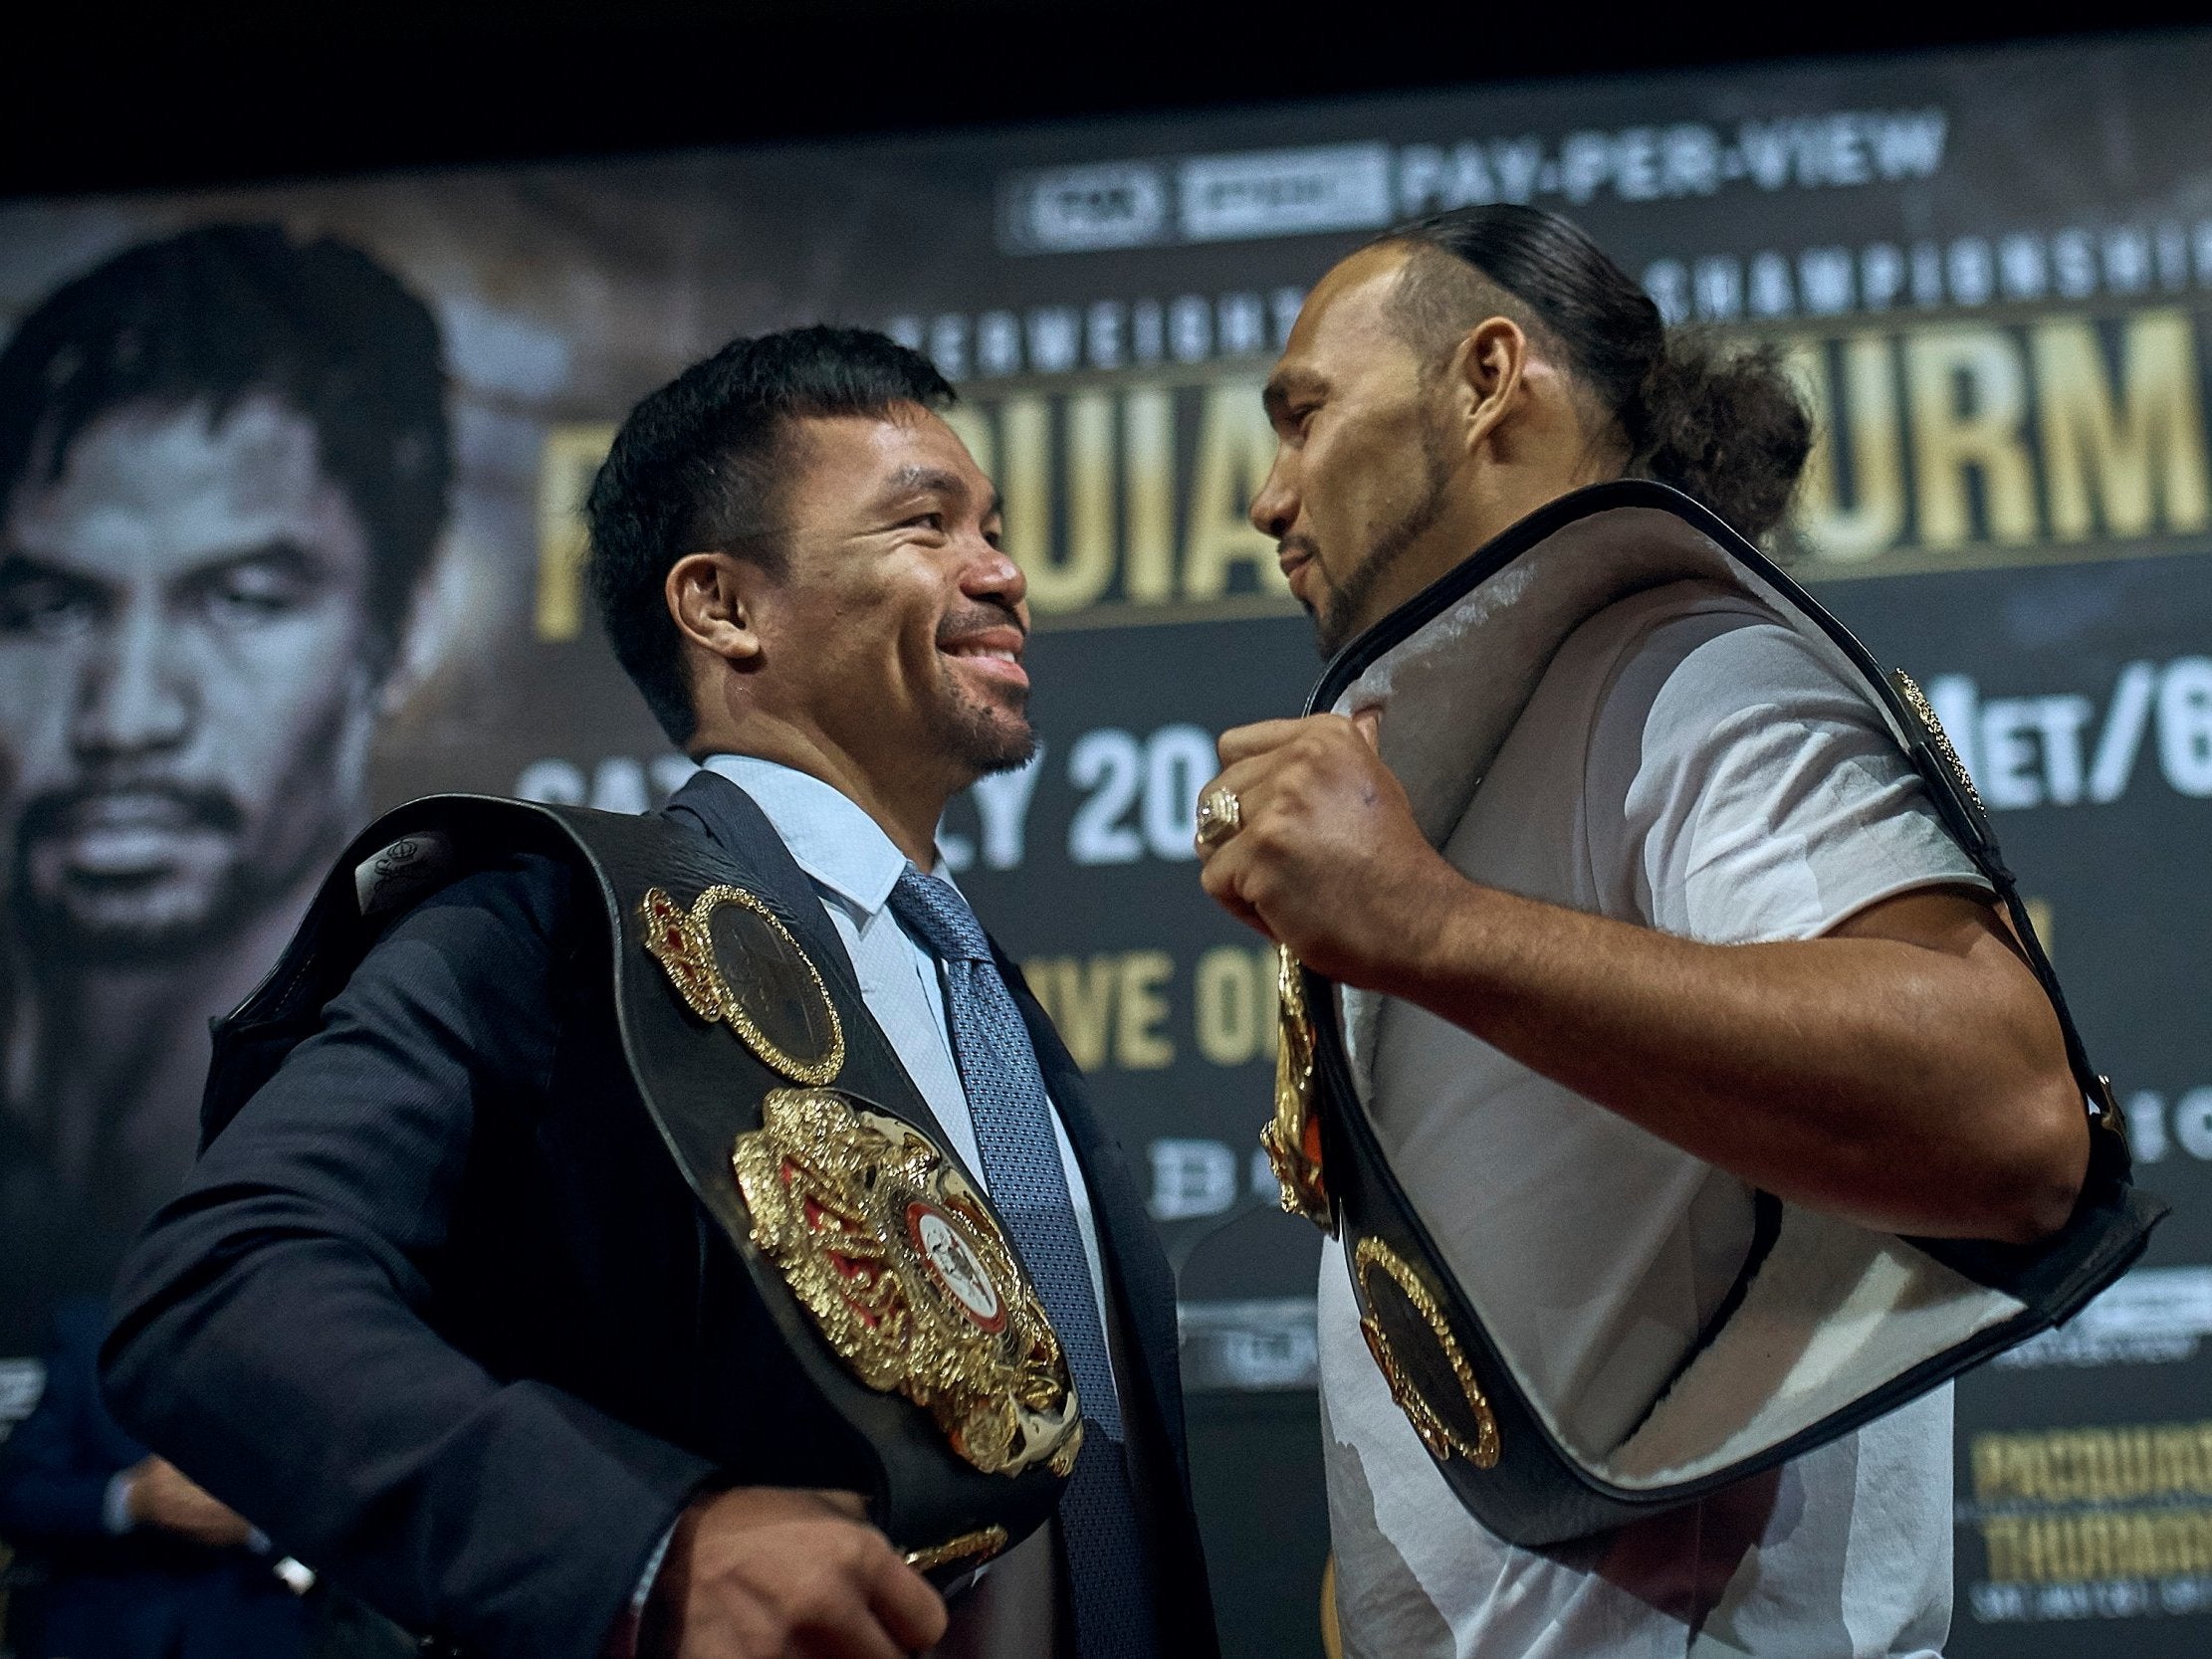 Pacquiao and Thurman clash on July 20